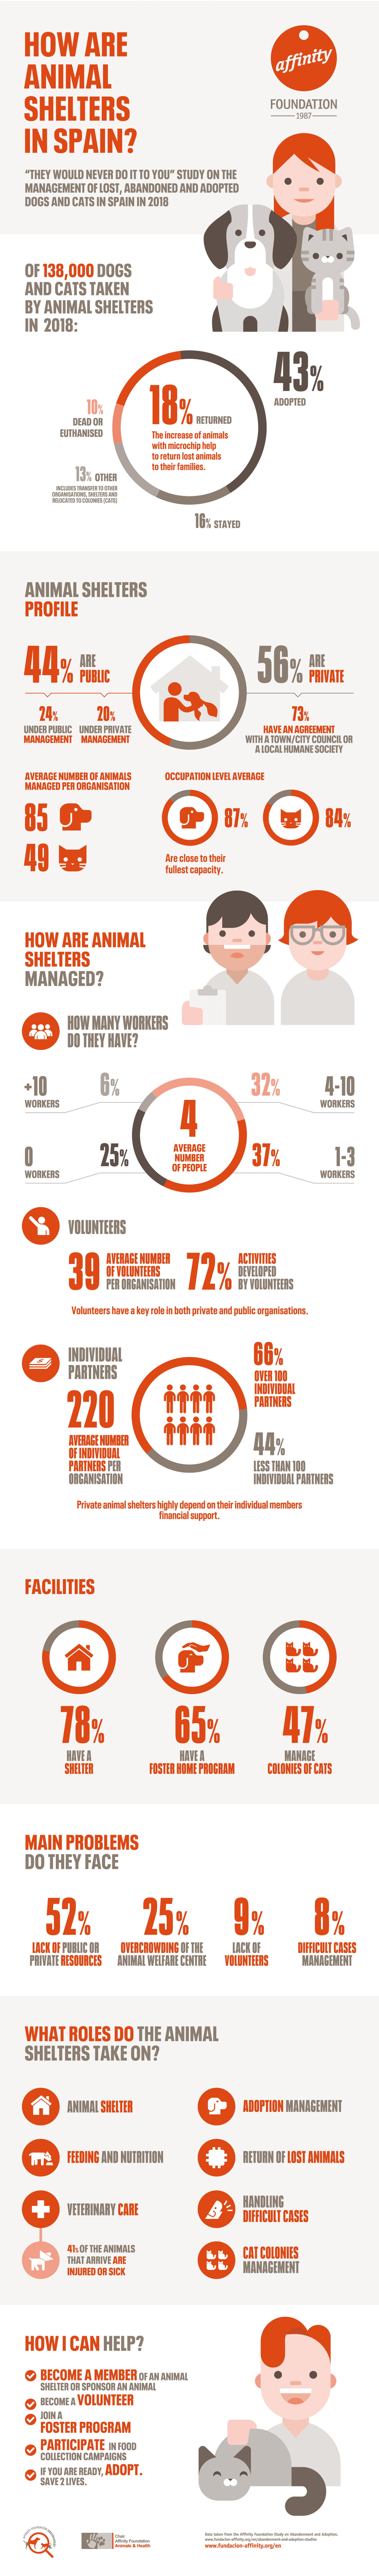 How are animal welfare centres in Spain? Infographic | Affinity Foundation